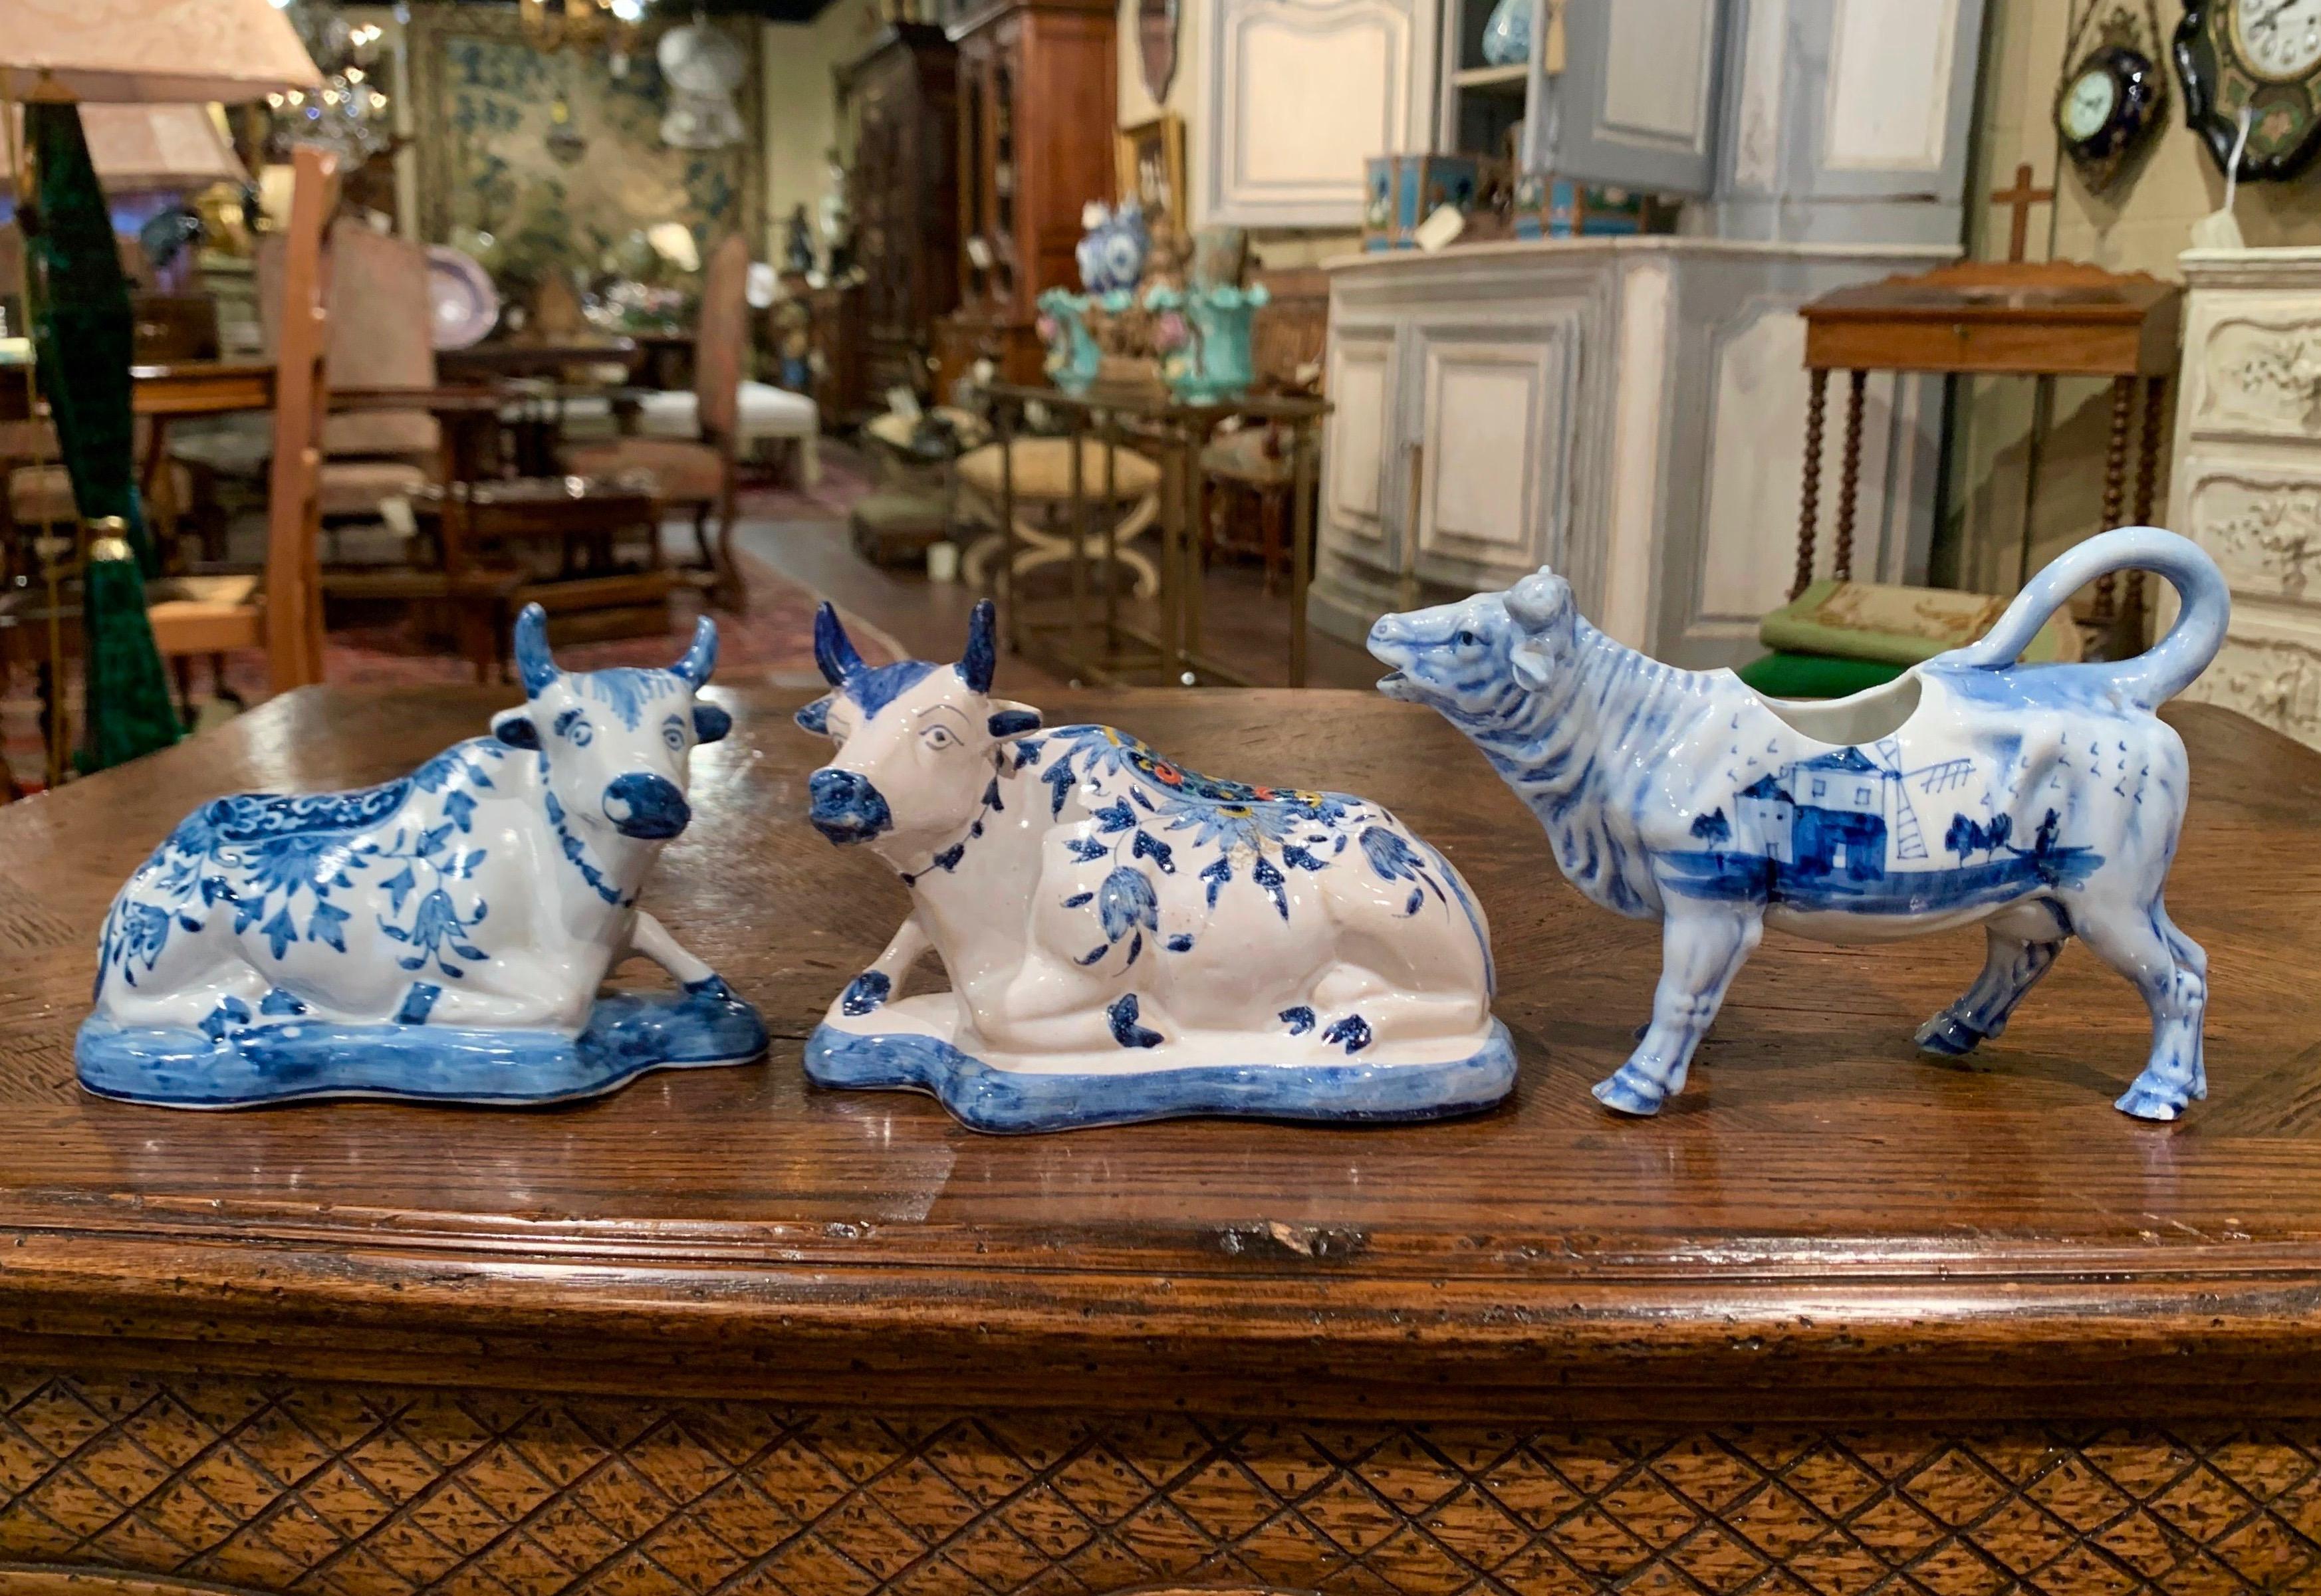 Crafted in Holland circa 1960, the three porcelain cow sculptures are hand painted in the traditional Delft blue and white colors with floral and sailboat motifs. Each bovine figure is stamped on the bottom with initials. The three pieces are in